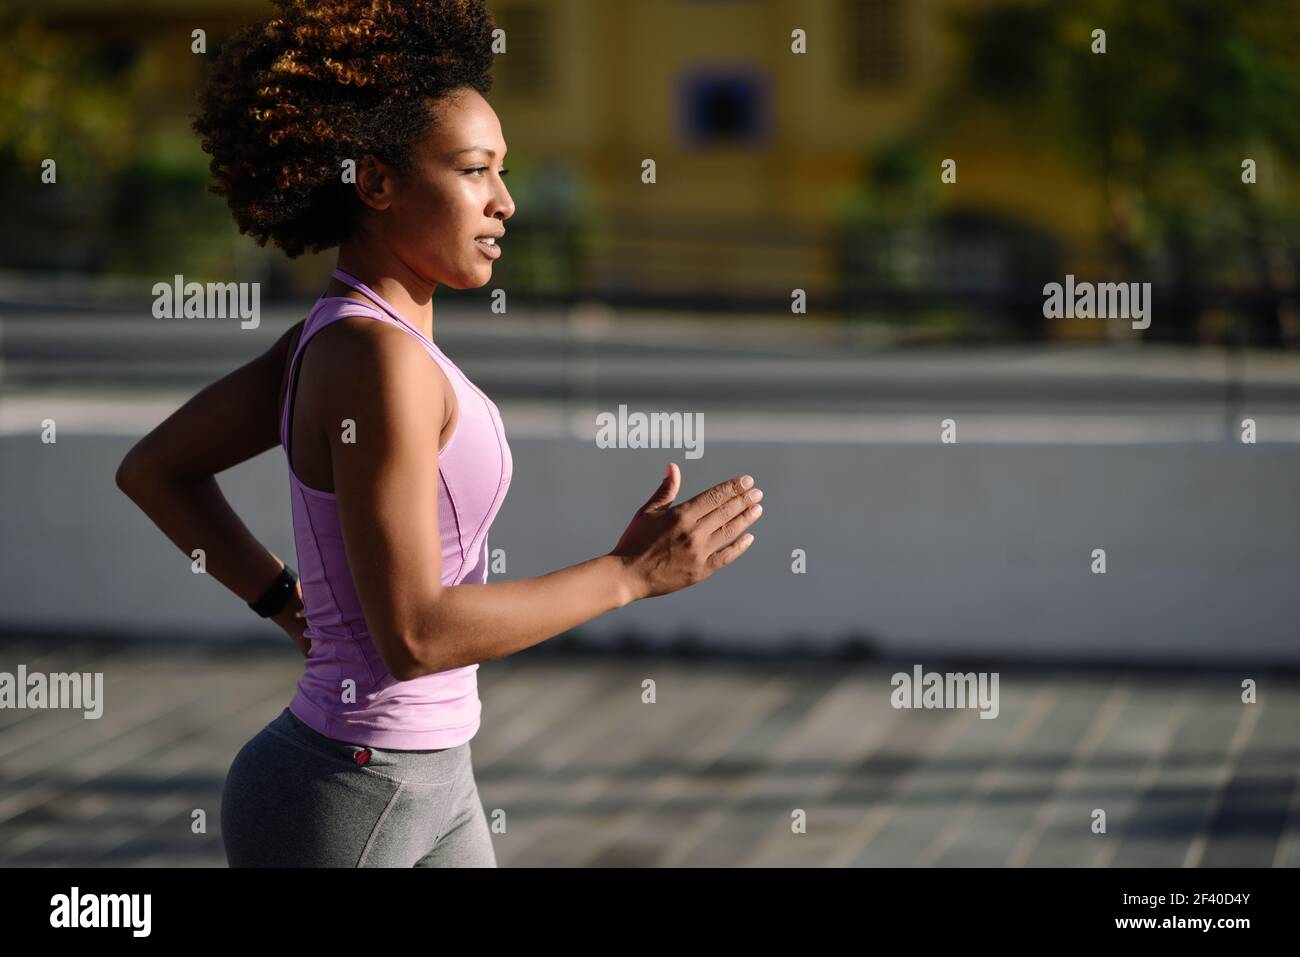 Portrait of a Female Athlete in Fitness Clothes Stock Image - Image of  black, action: 136613685